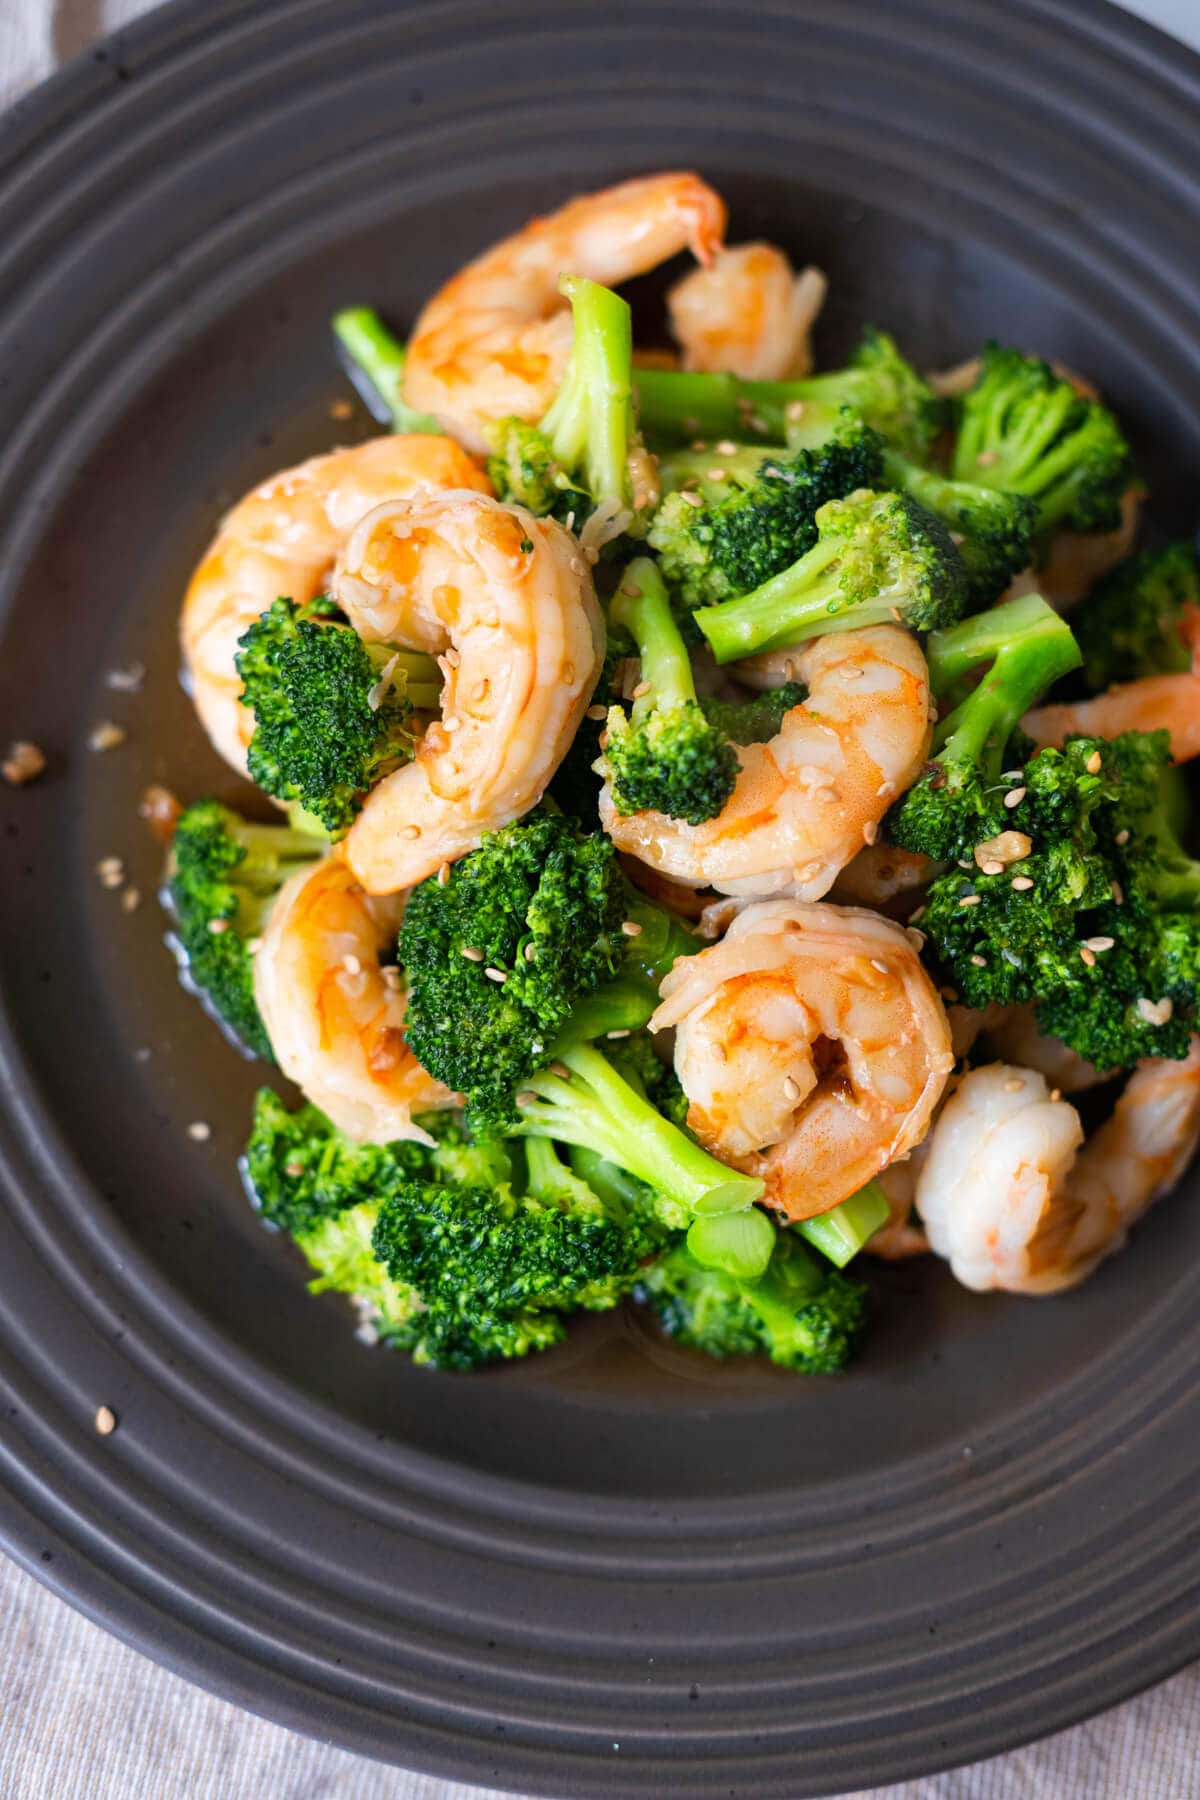 Shrimp and broccoli coated with brown sauce and served in a large black shallow plate. 